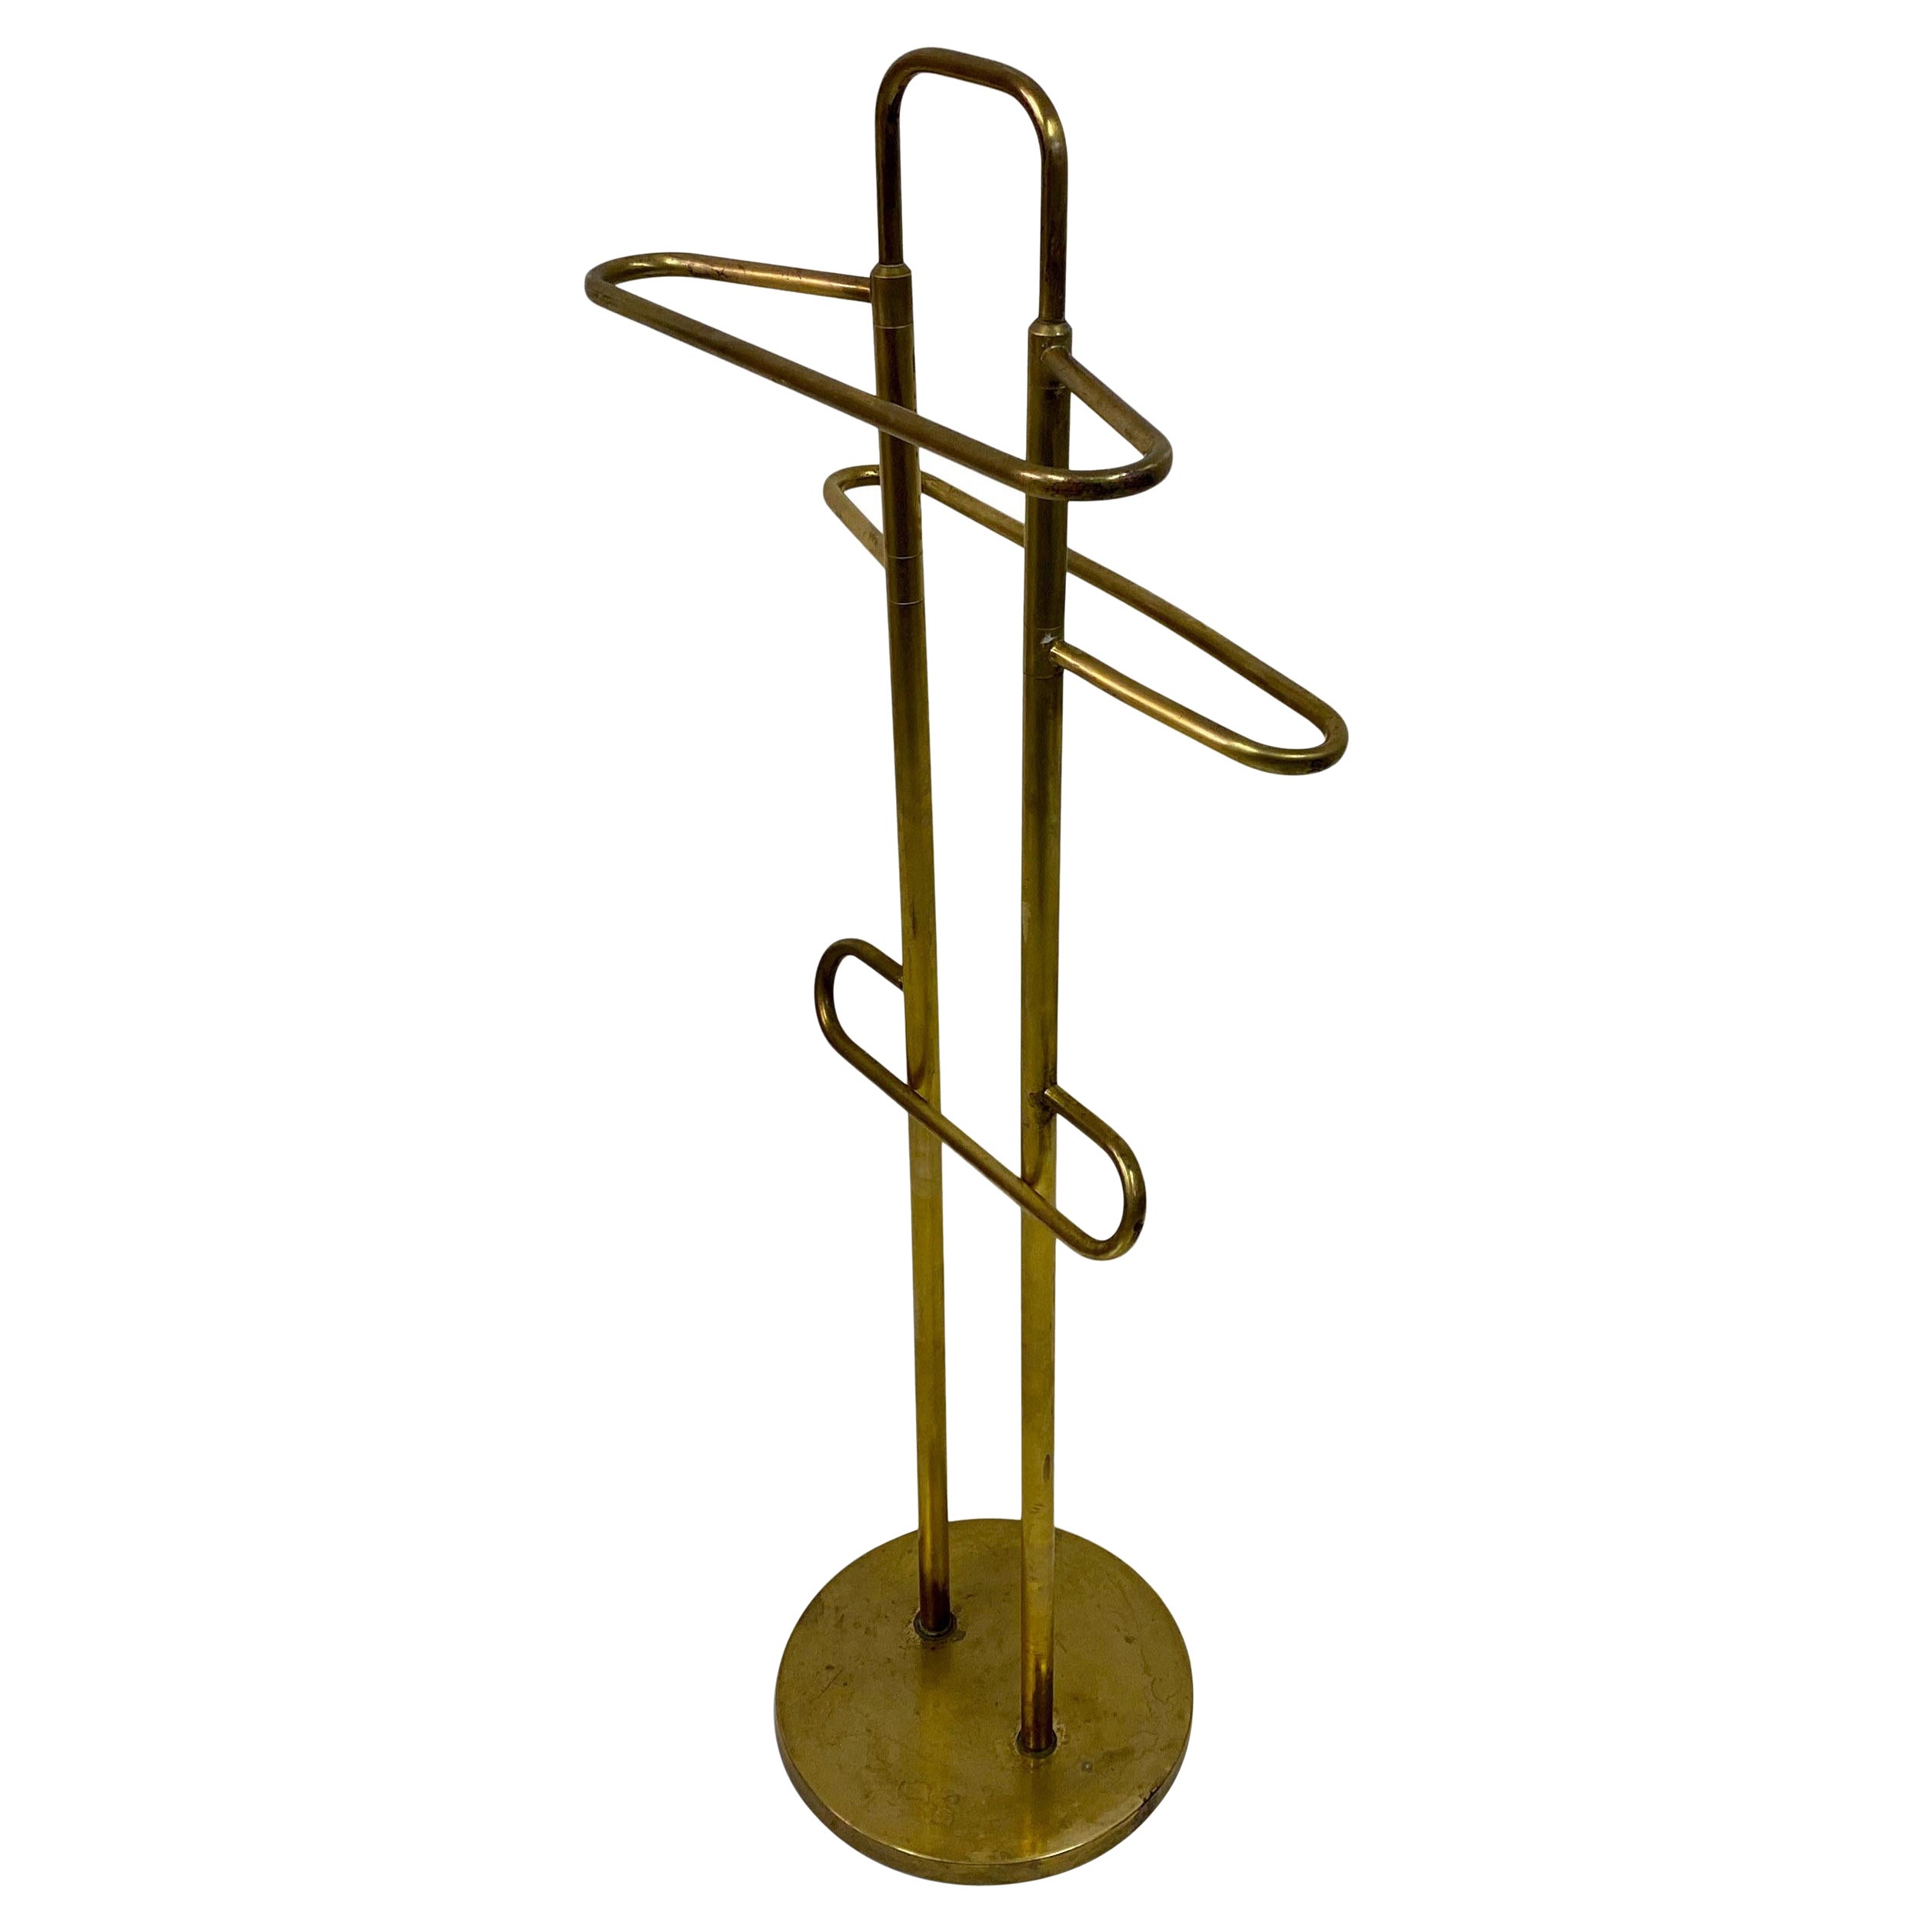 1970s Italian Brass Valet or Towel Stand